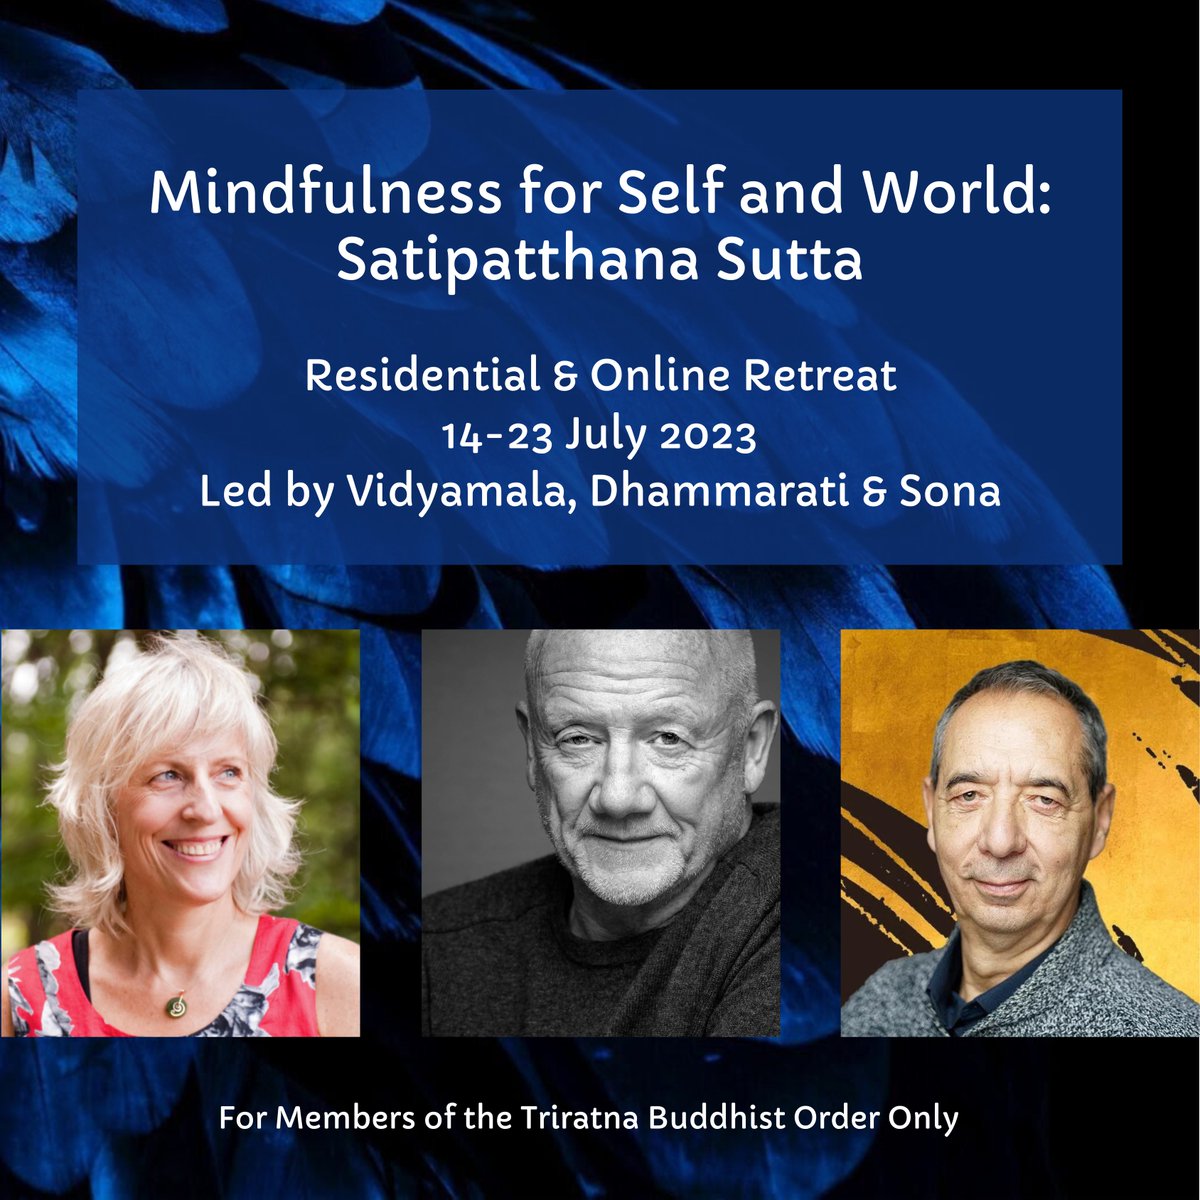 Next month, Dhammarati, Sona and I will be leading the Mindfulness for Self and World retreat 🌍 Join us either in-person- where you can rest and enjoy nature 🌱 - or from the comfort of your own home. For more information, visit: adhisthana.org/retreat-calend…